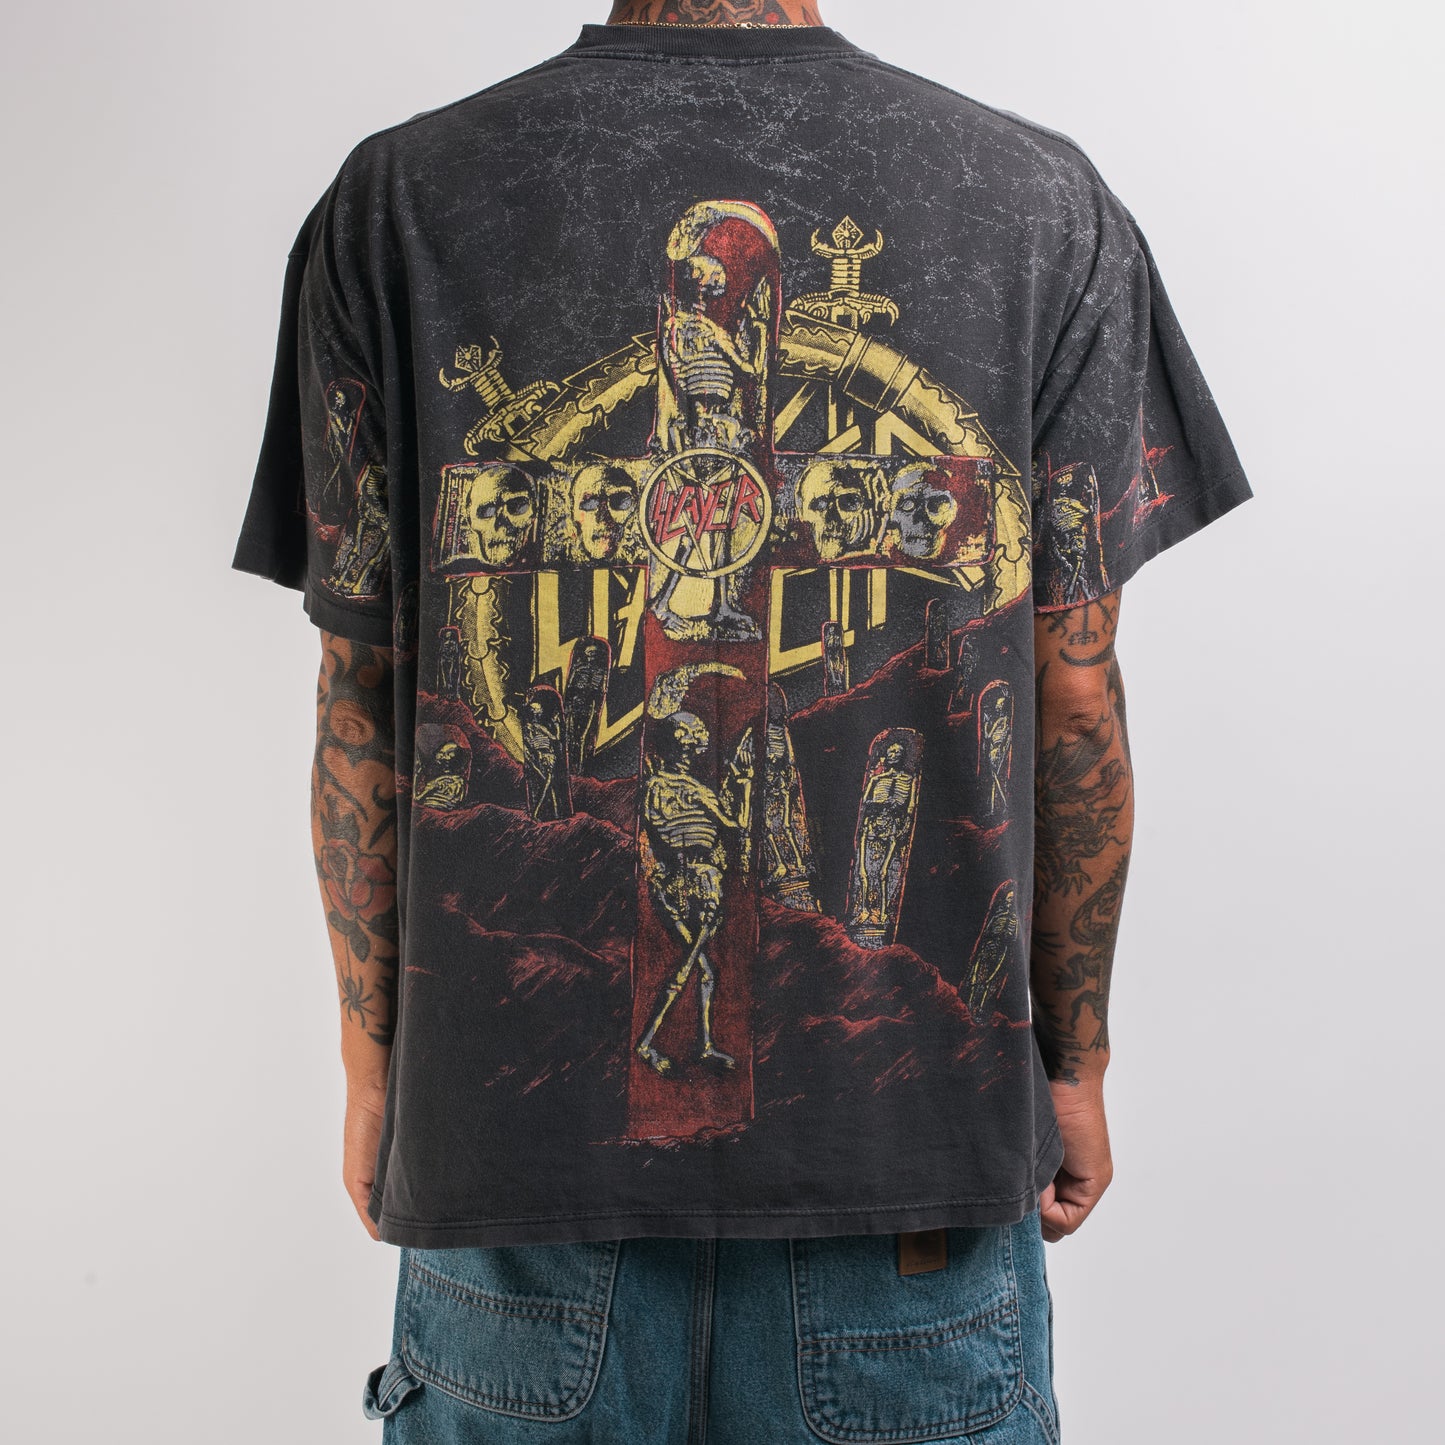 Vintage 1991 Slayer Seasons In The Abyss All Over Print T-Shirt